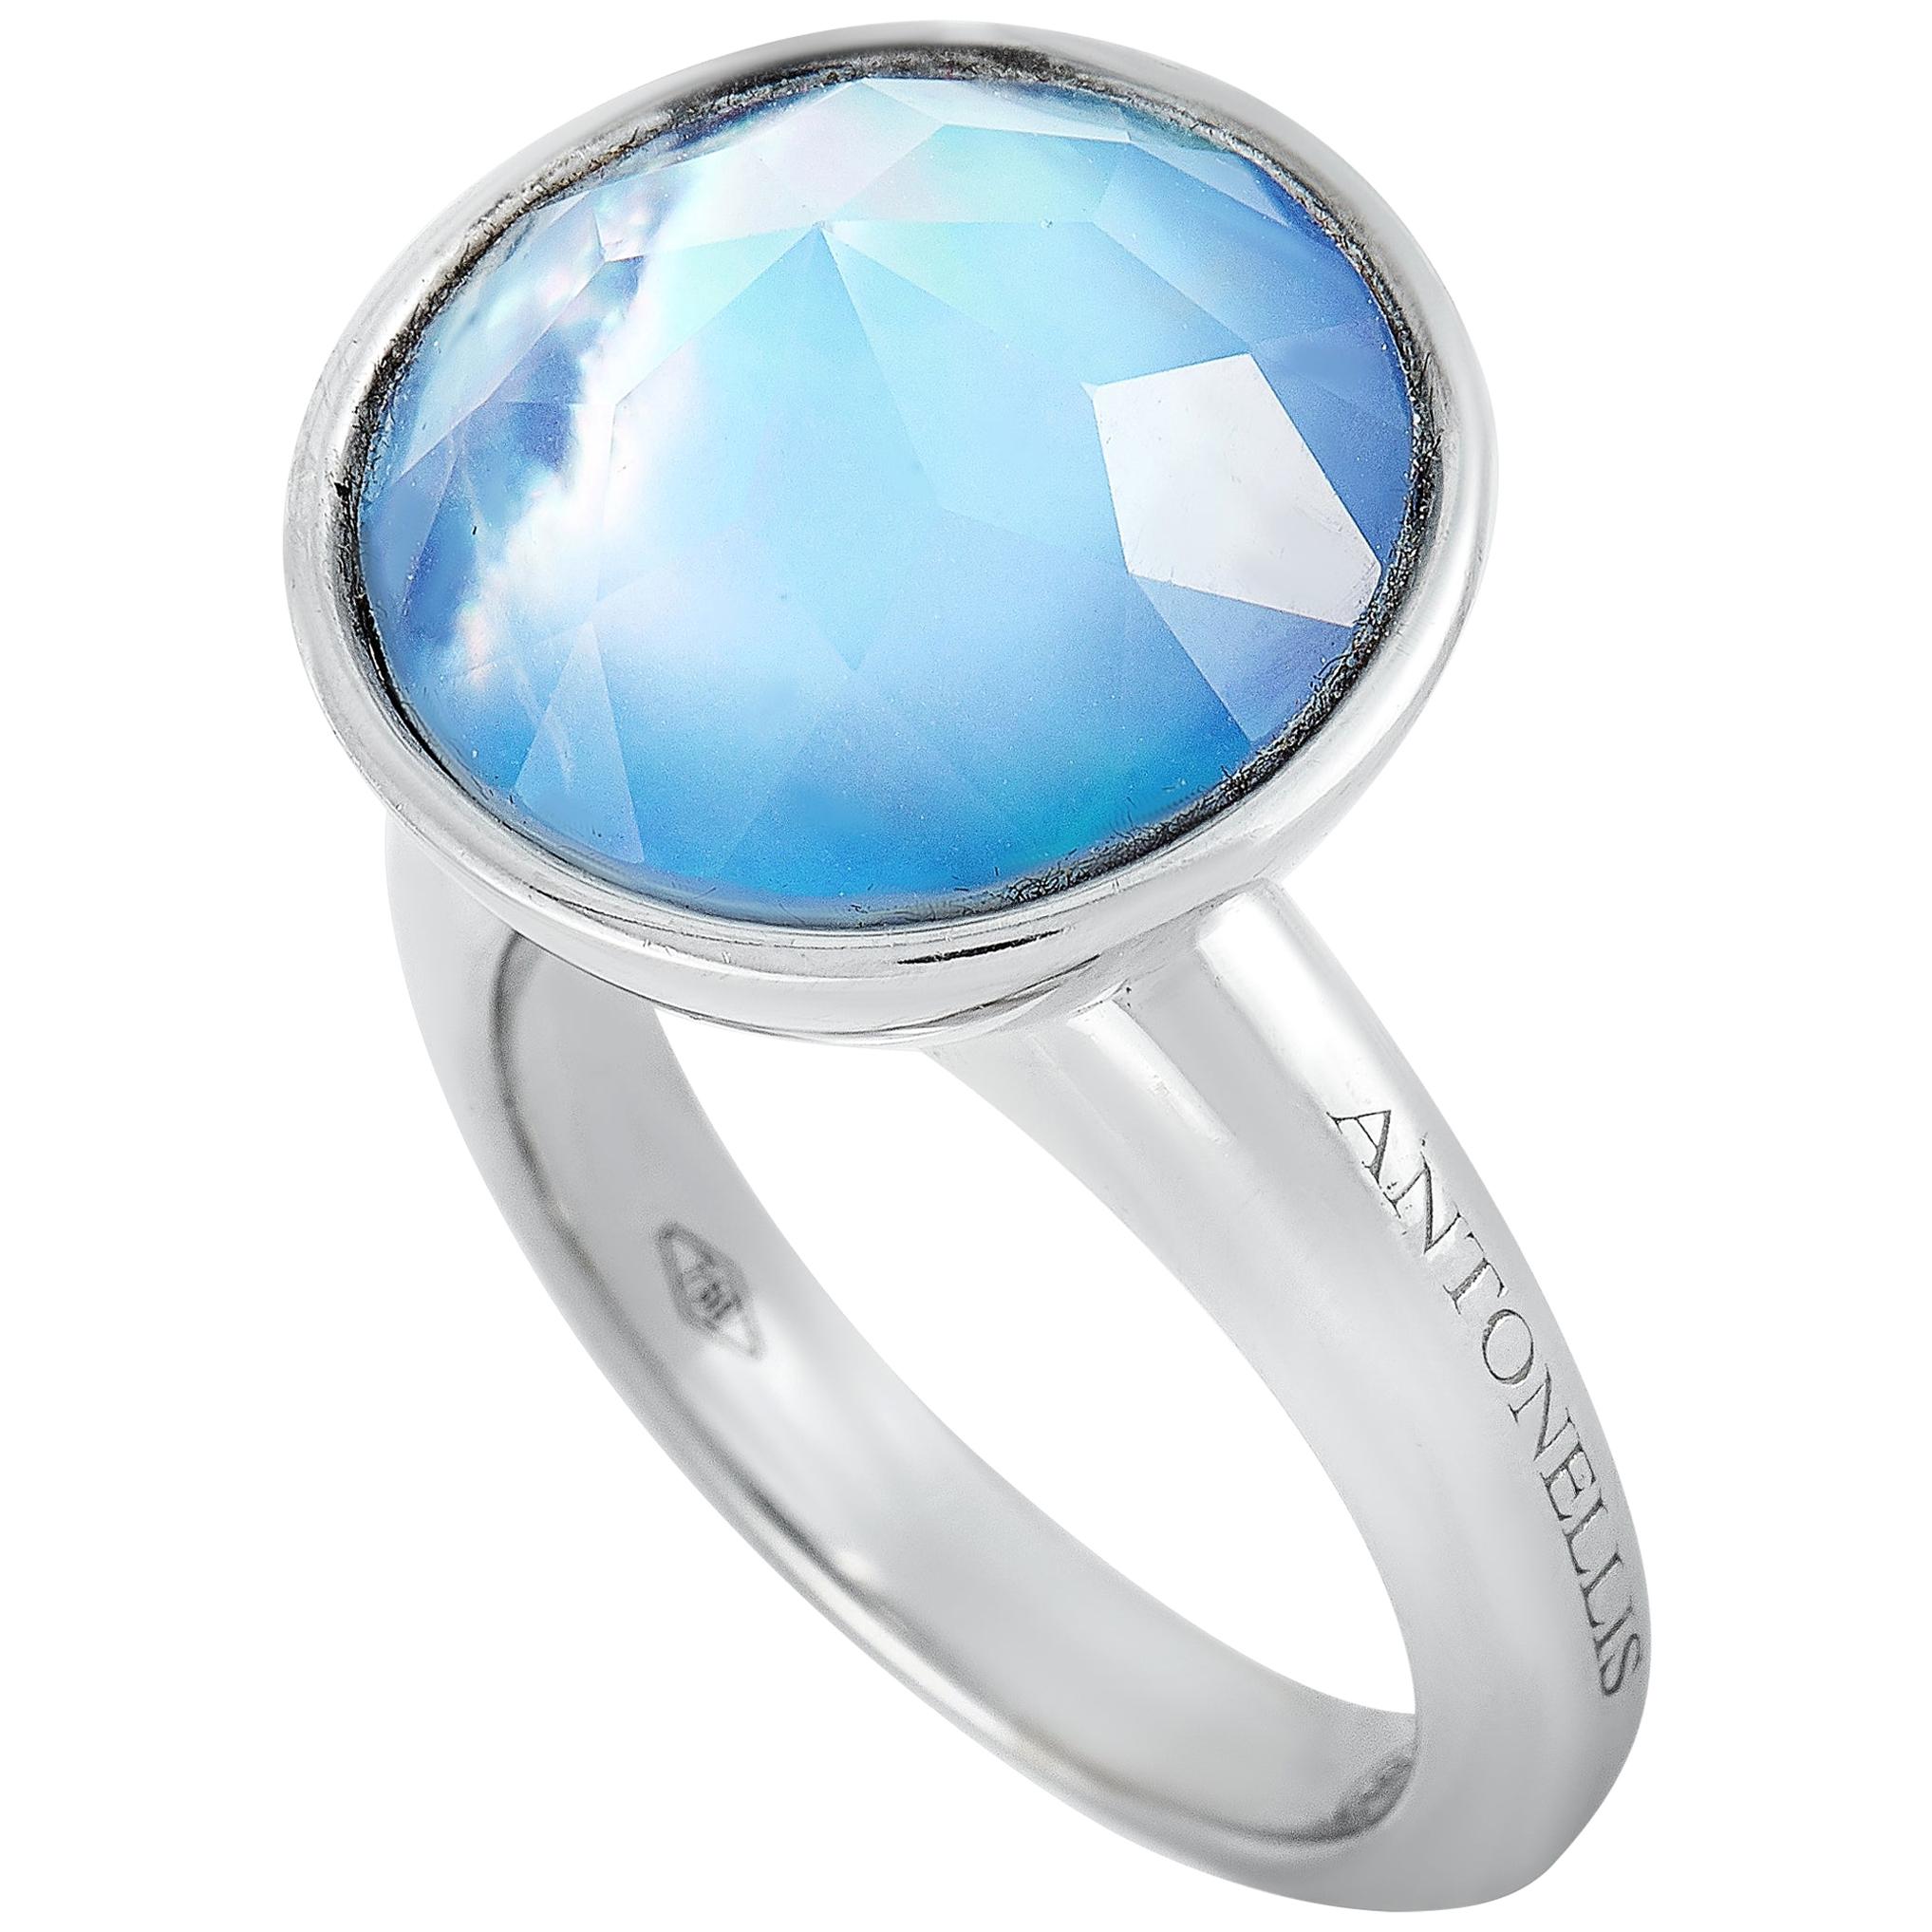 Antonellis 18 Karat White Gold and Mother of Pearl Ring